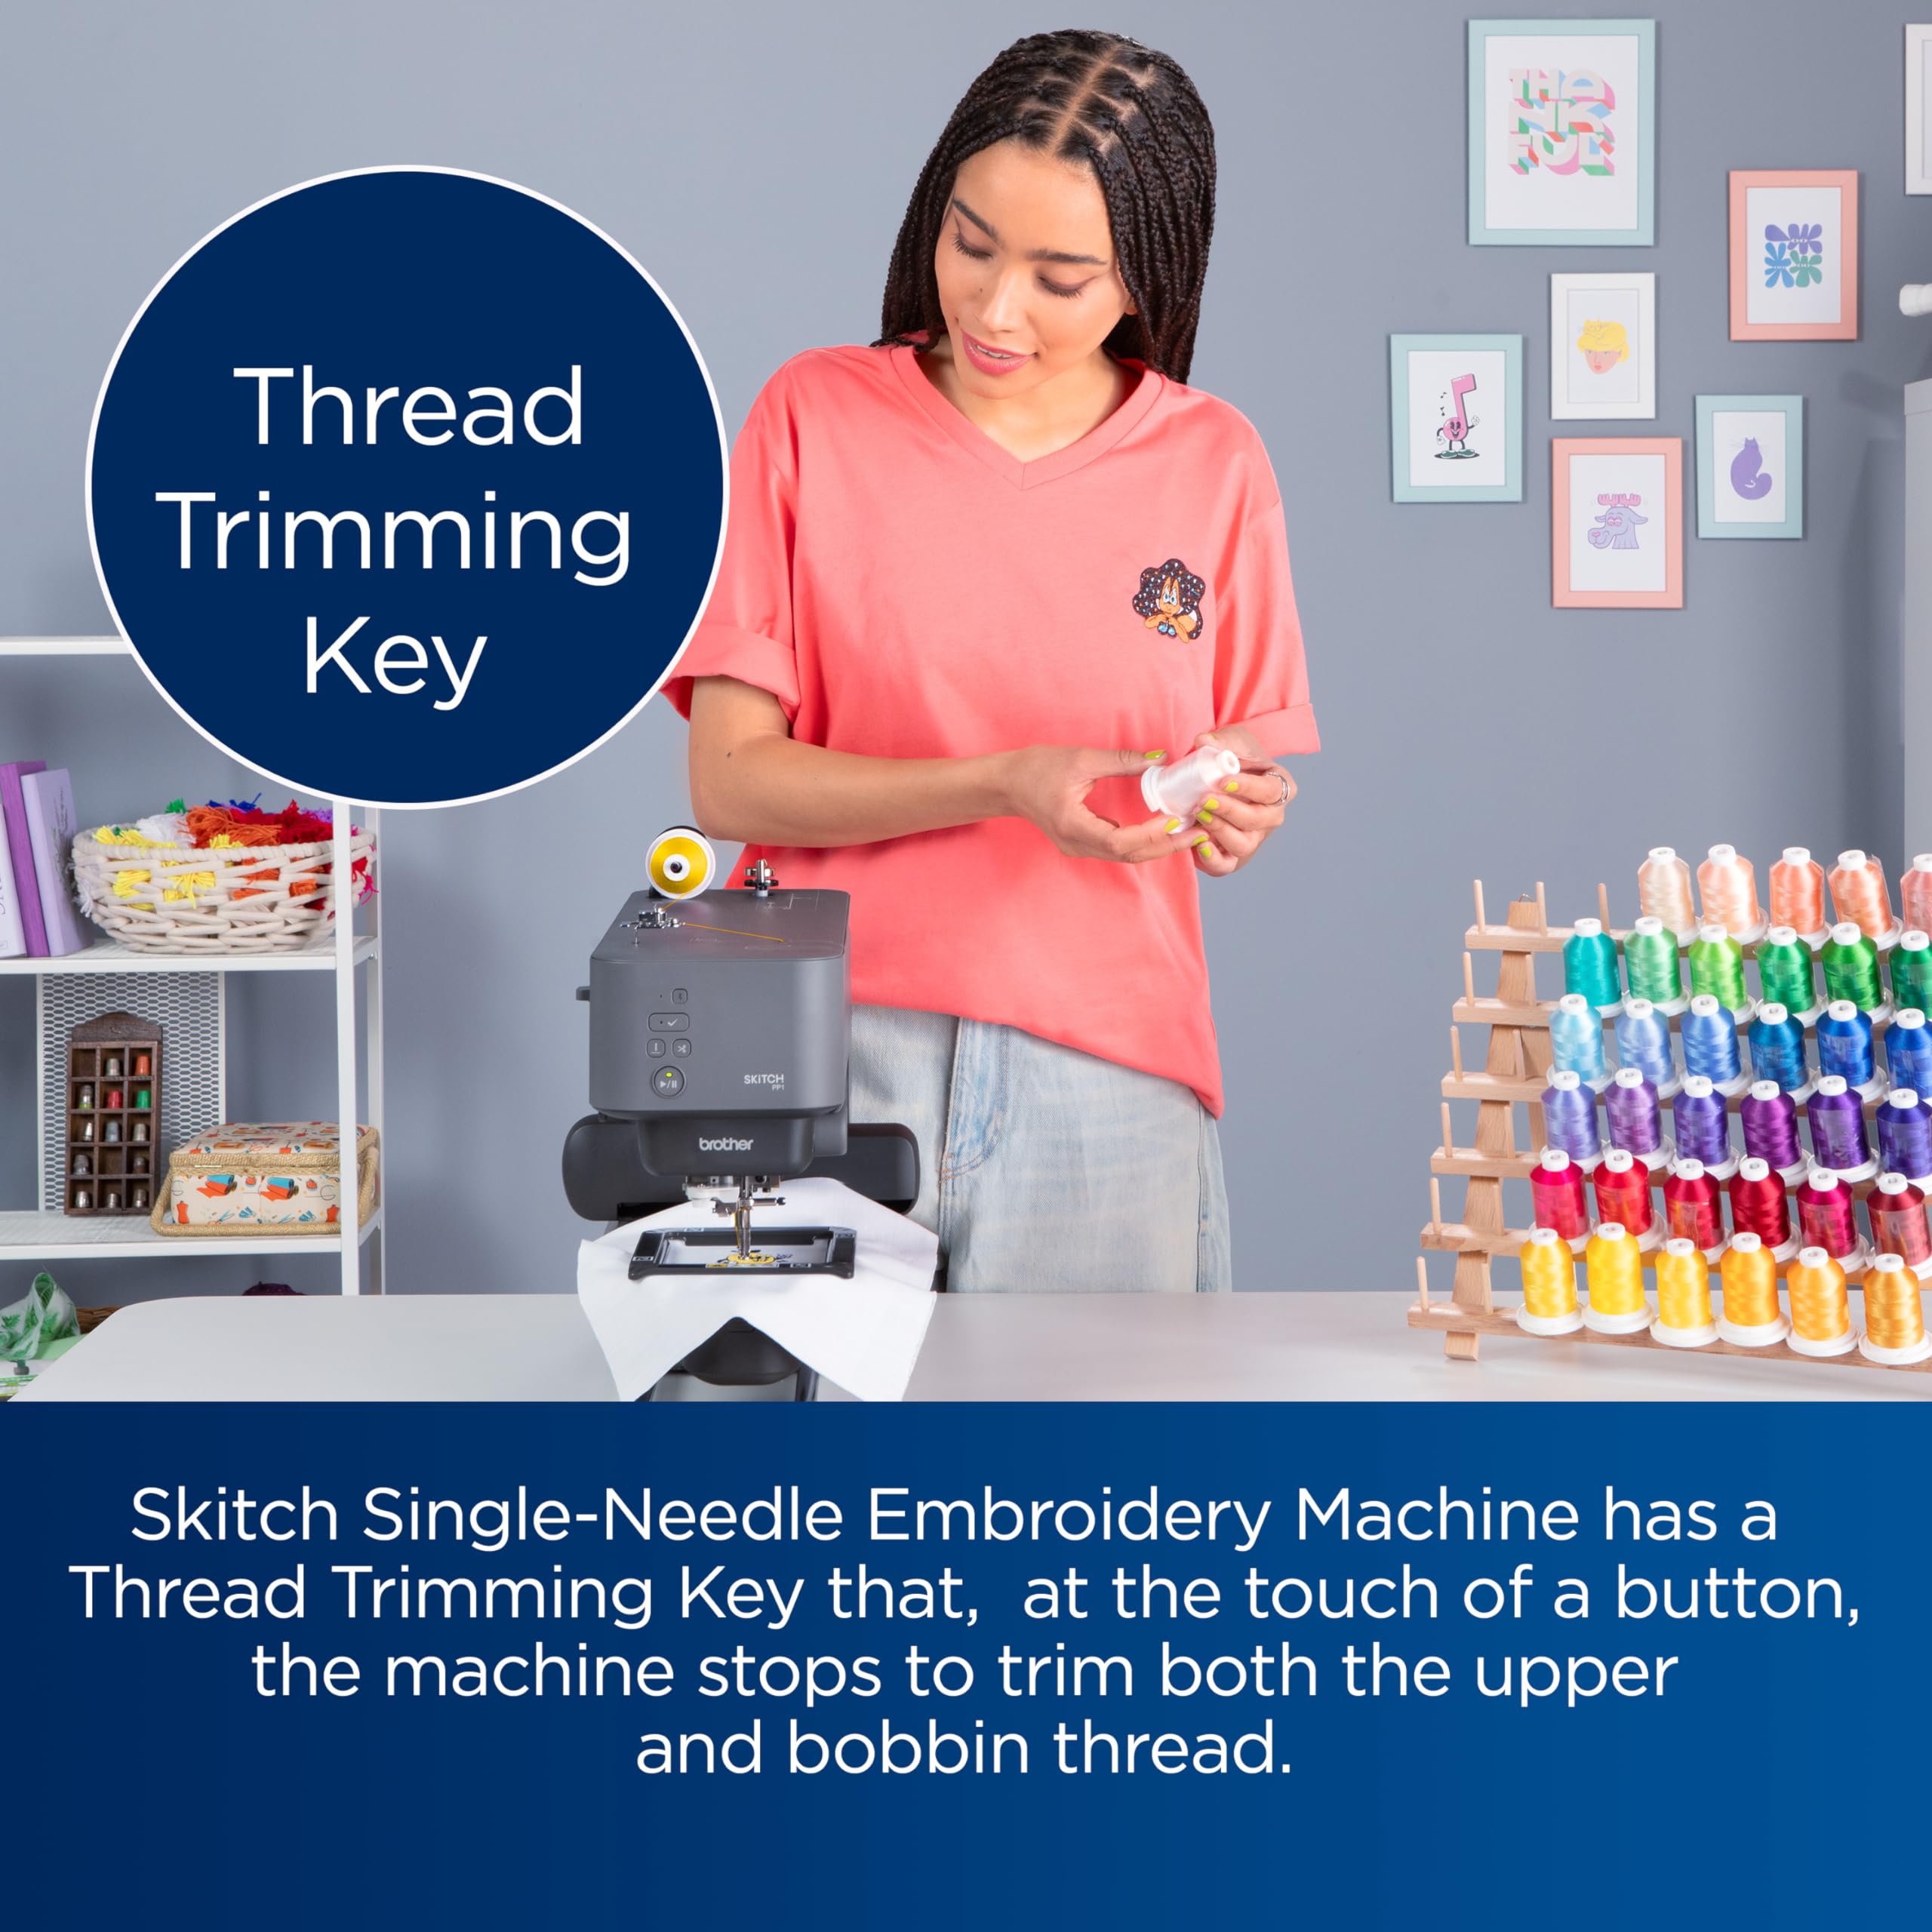 Brother Skitch Single-Needle Embroidery Machine with Artspira connection